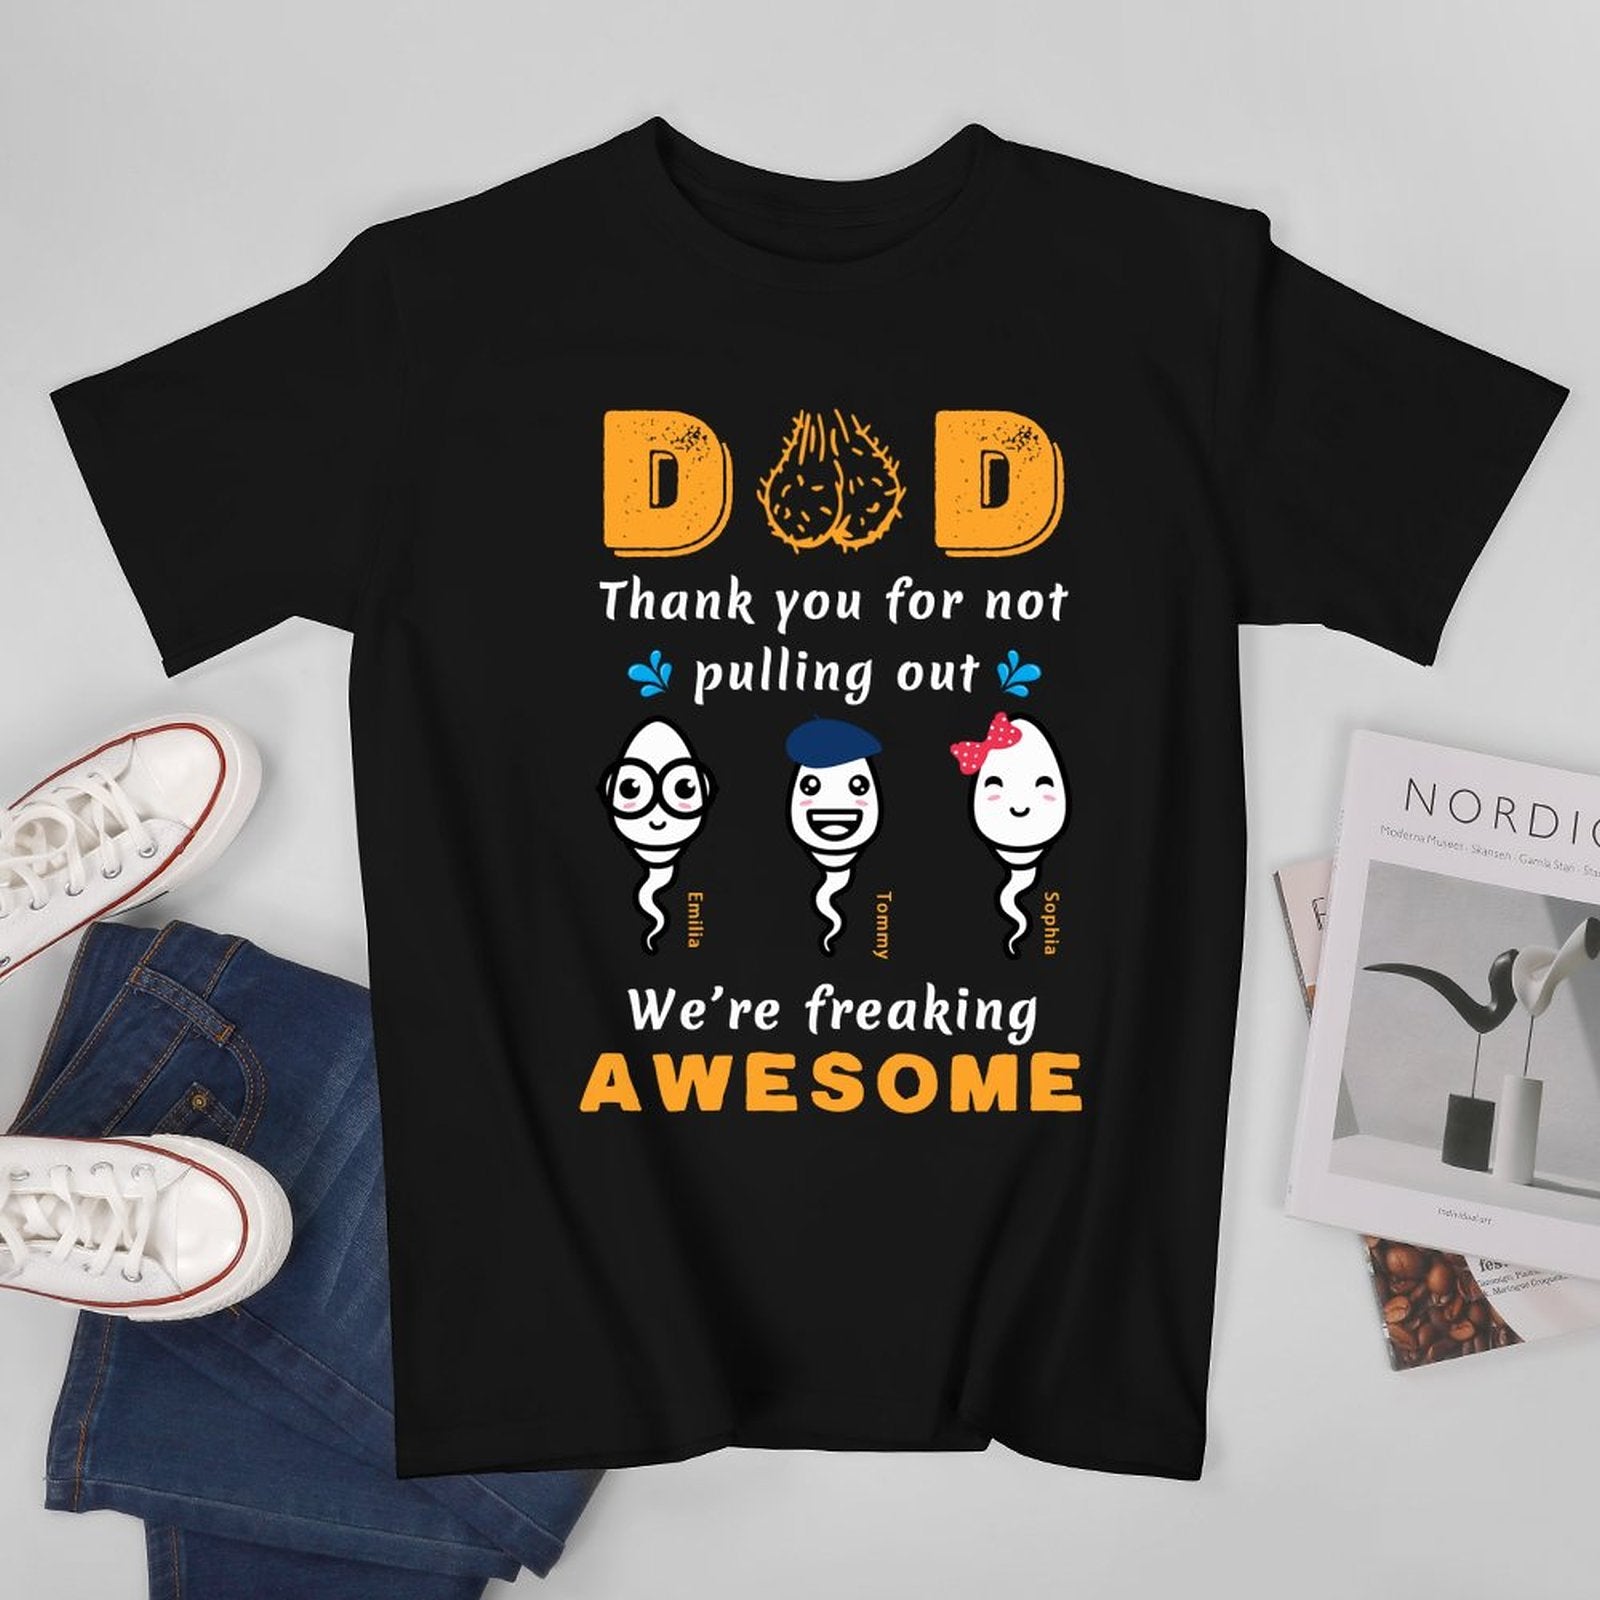 Custom T-Shirt for Father's Day, Personalized T Shirt for Men, Father's Day Present Shirt, Funny Dad Shirt, Custom Kids Name Shirt, Dad Gifts - colorfulcustom